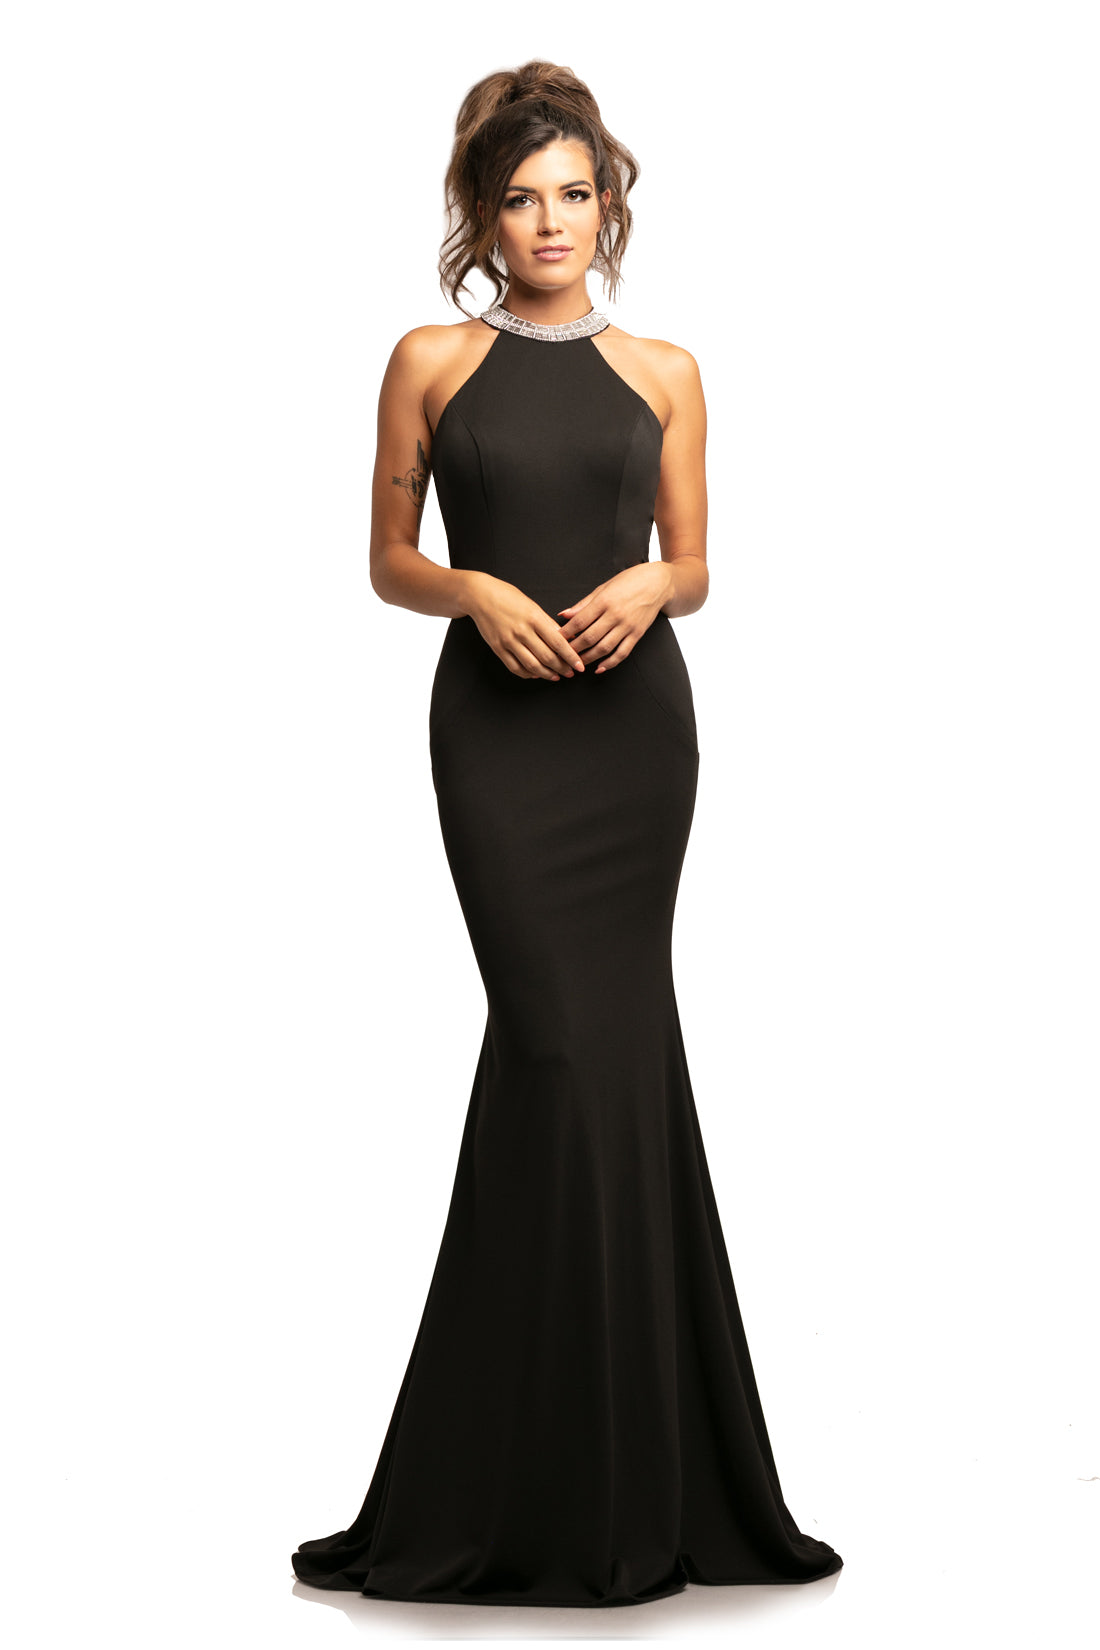 Johnathan Kayne 2049 is a open back Prom Dress, Pageant Gown & Formal Evening Wear with fringe tassels that flow down the back. This stunning high neckline long dress features a crystal accented choker neckline with a sheer mesh back with hanging rows of crystal tassels.